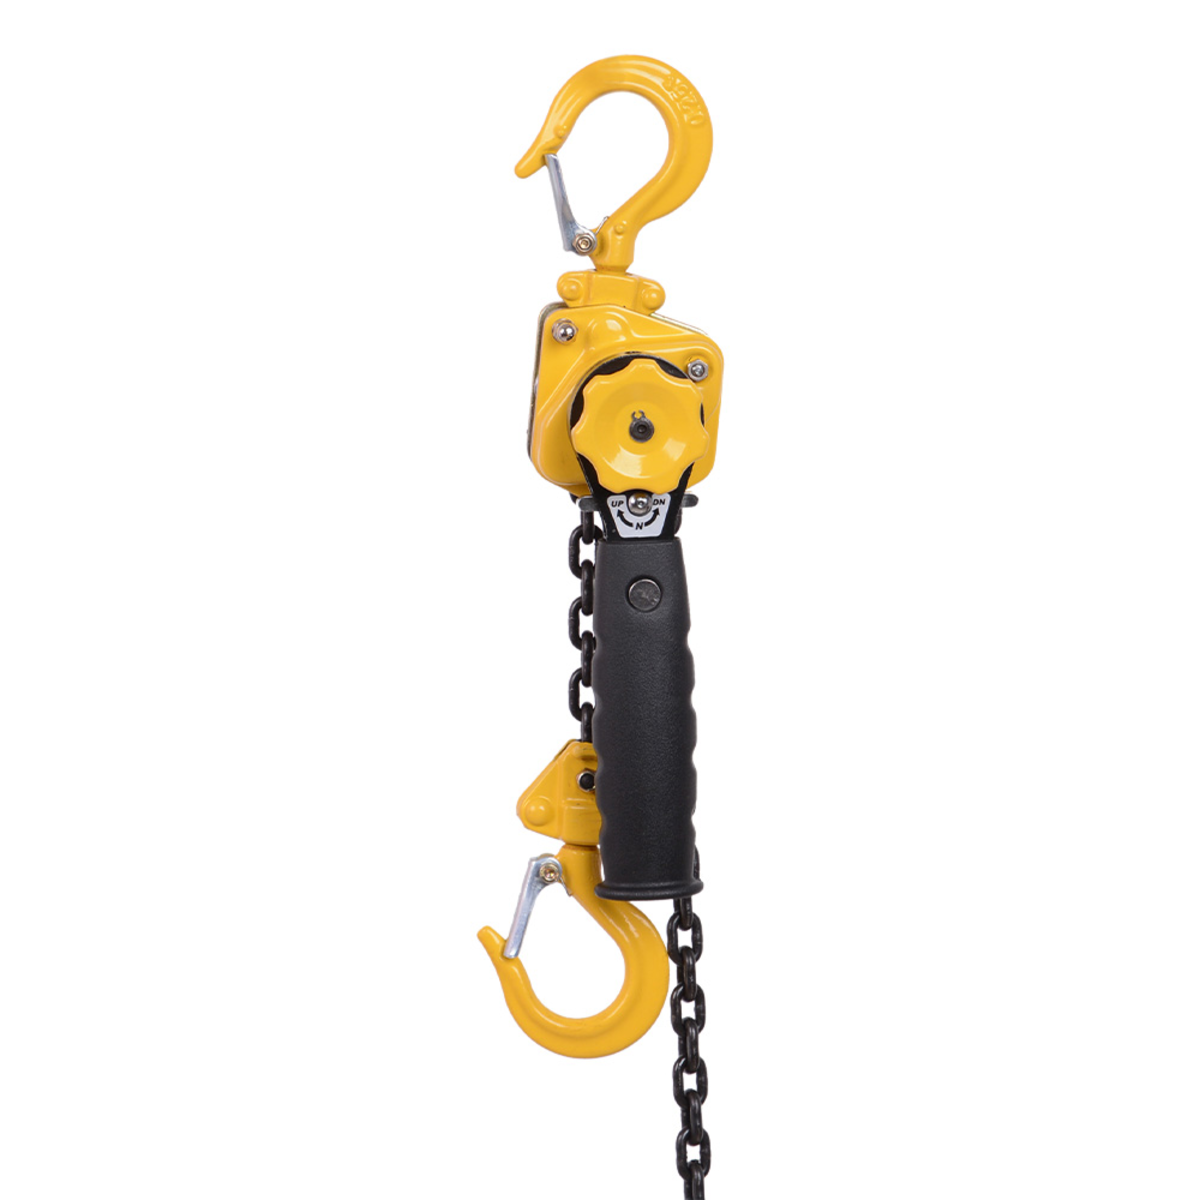 1 Ton Chain Hoist with 20 ft. Chain Fall and overload protection